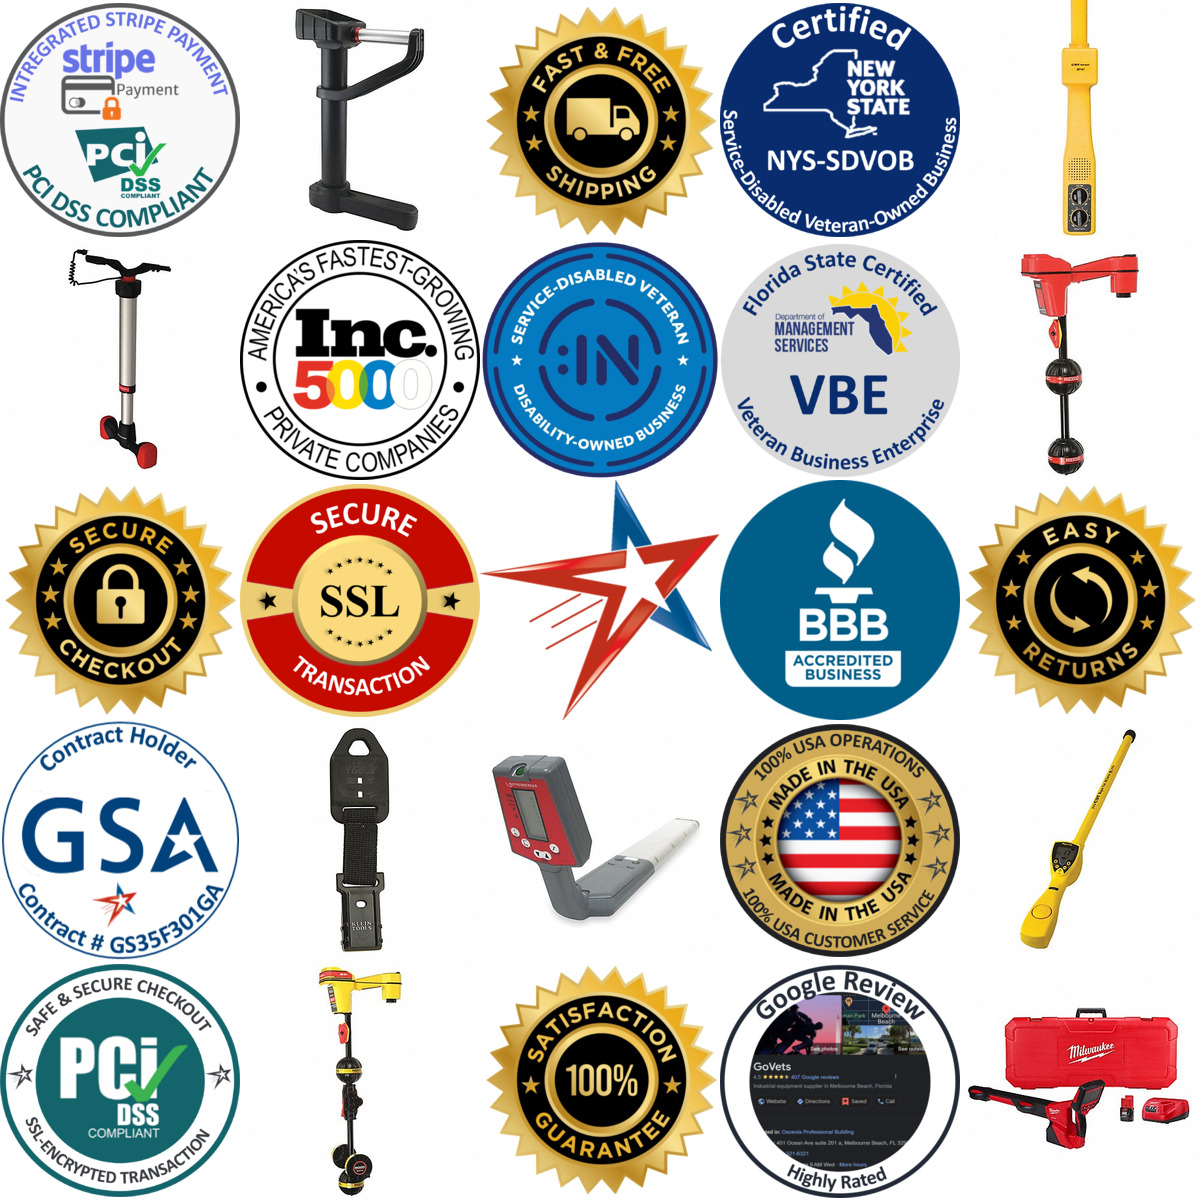 A selection of Pipe Locators products on GoVets